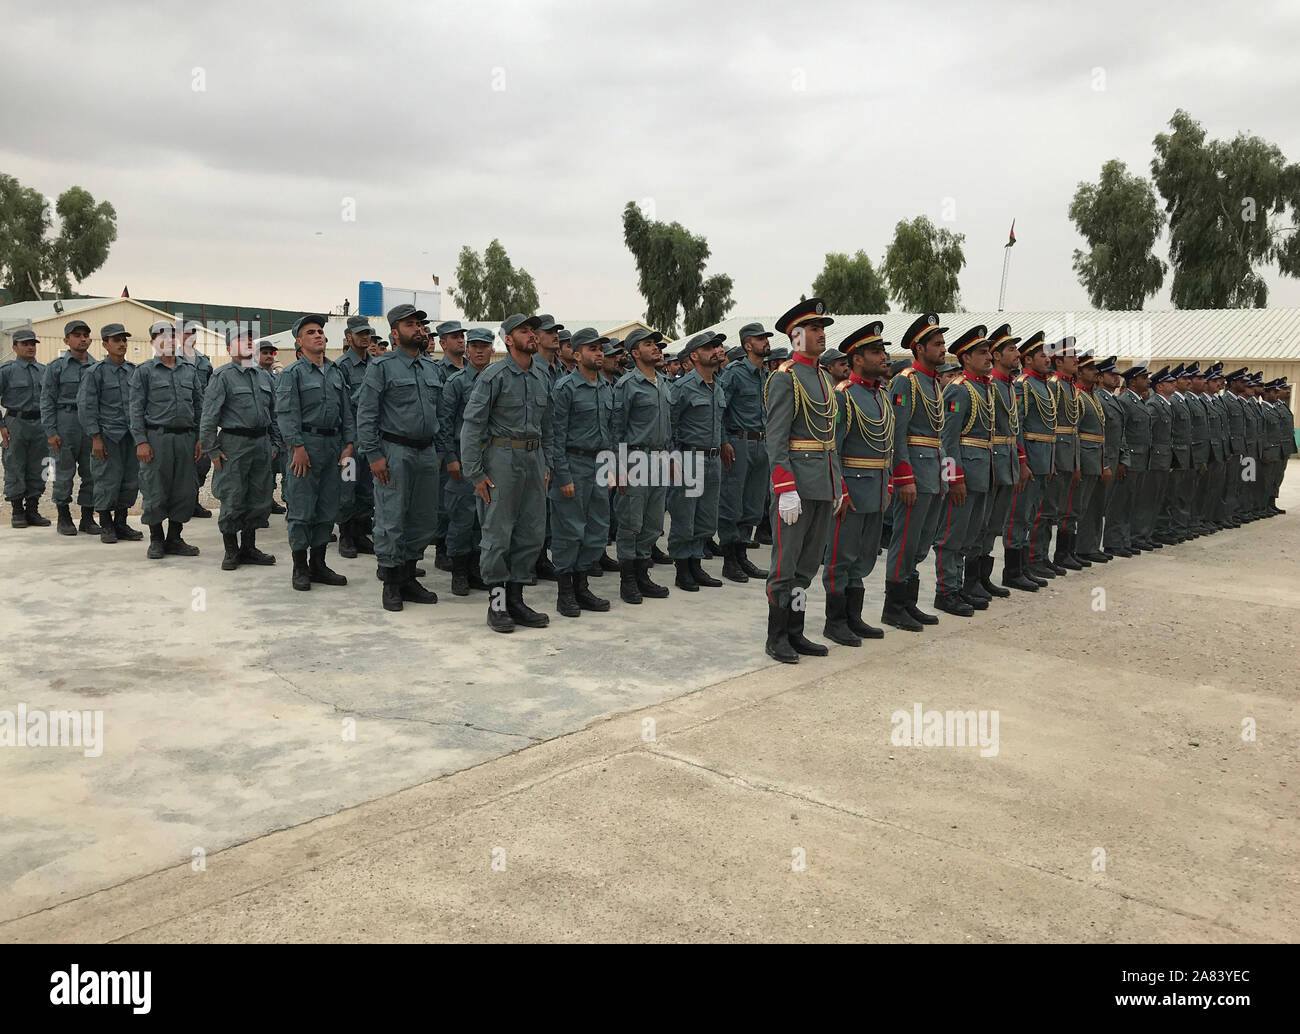 (191106) -- KANDAHAR, Nov. 6, 2019 (Xinhua) -- Afghan police officers take part in their graduation ceremony in Daman district of Kandahar province, Afghanistan, Nov. 5, 2019. A total of 246 police officers graduated from an Afghan National Police (ANP) training center in southern Kandahar province on Tuesday, local police said. (Photo by Arghand/Xinhua) Stock Photo